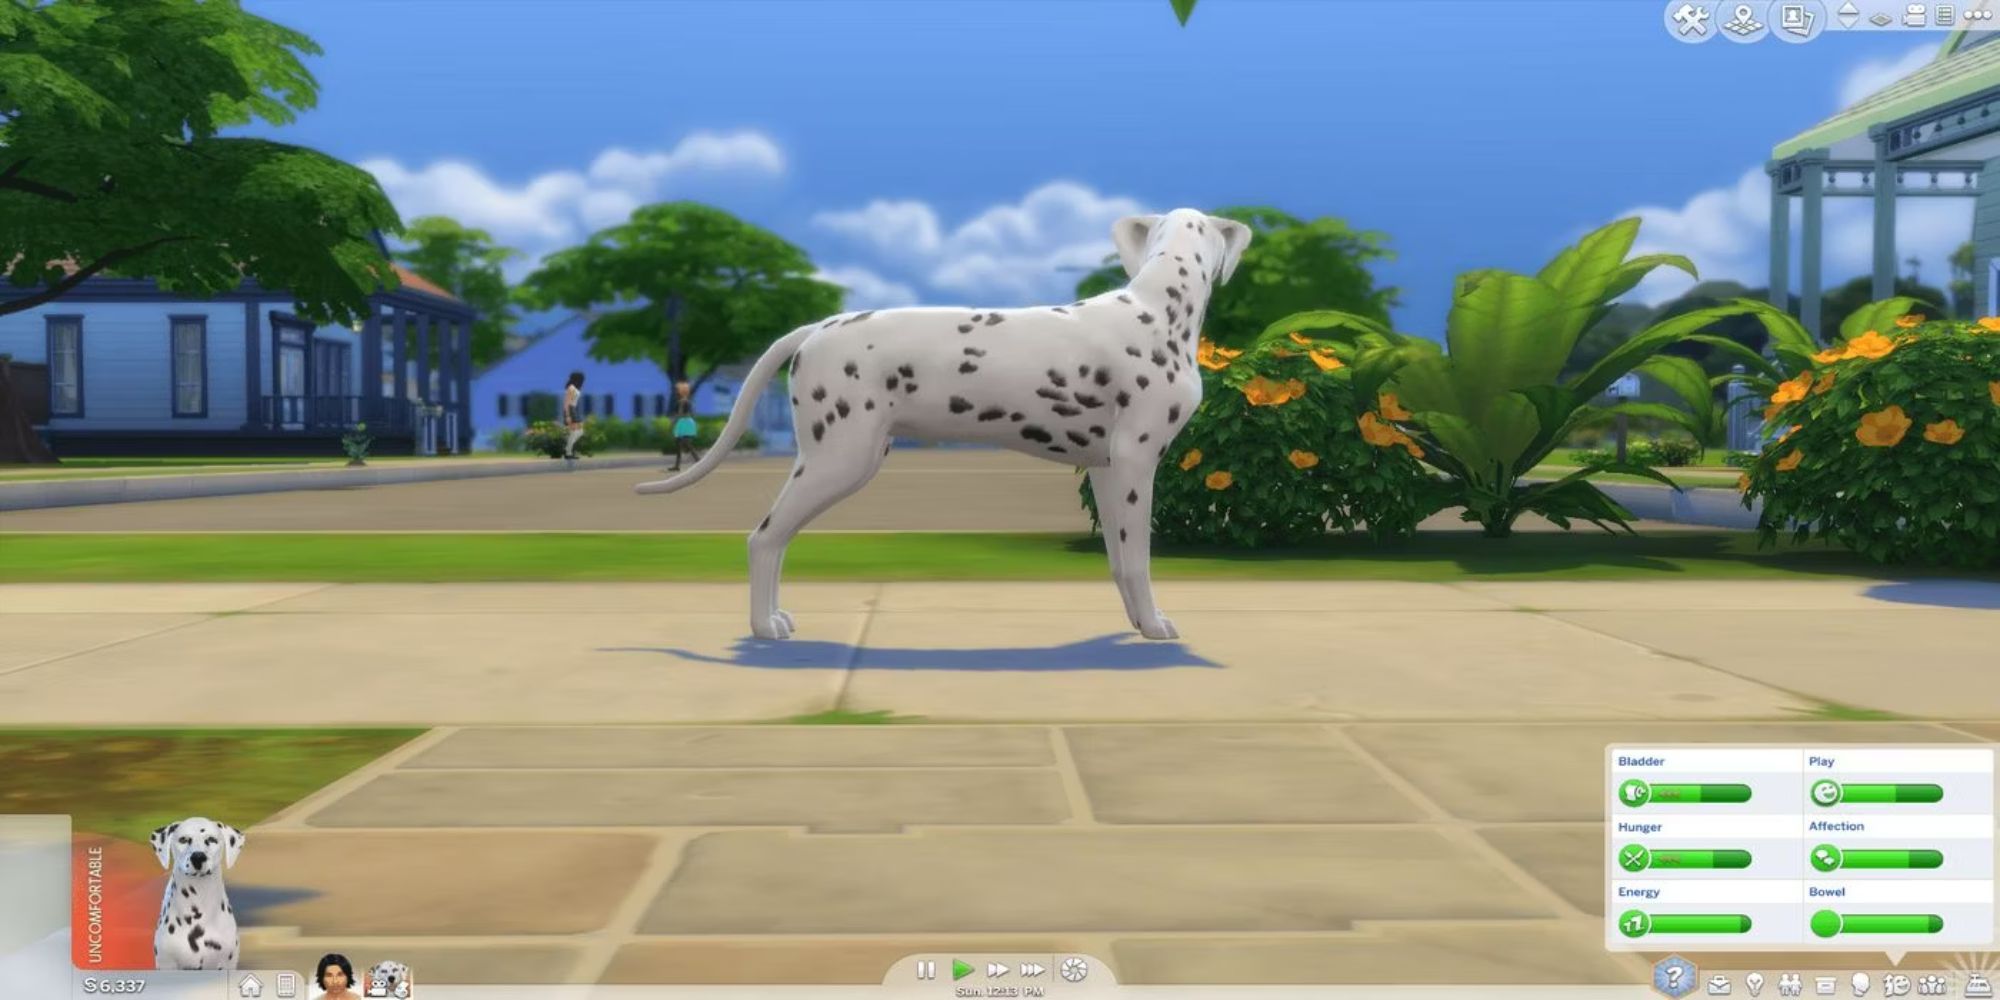 Playable Dalmatian dog and its needs panel in The Sims 4